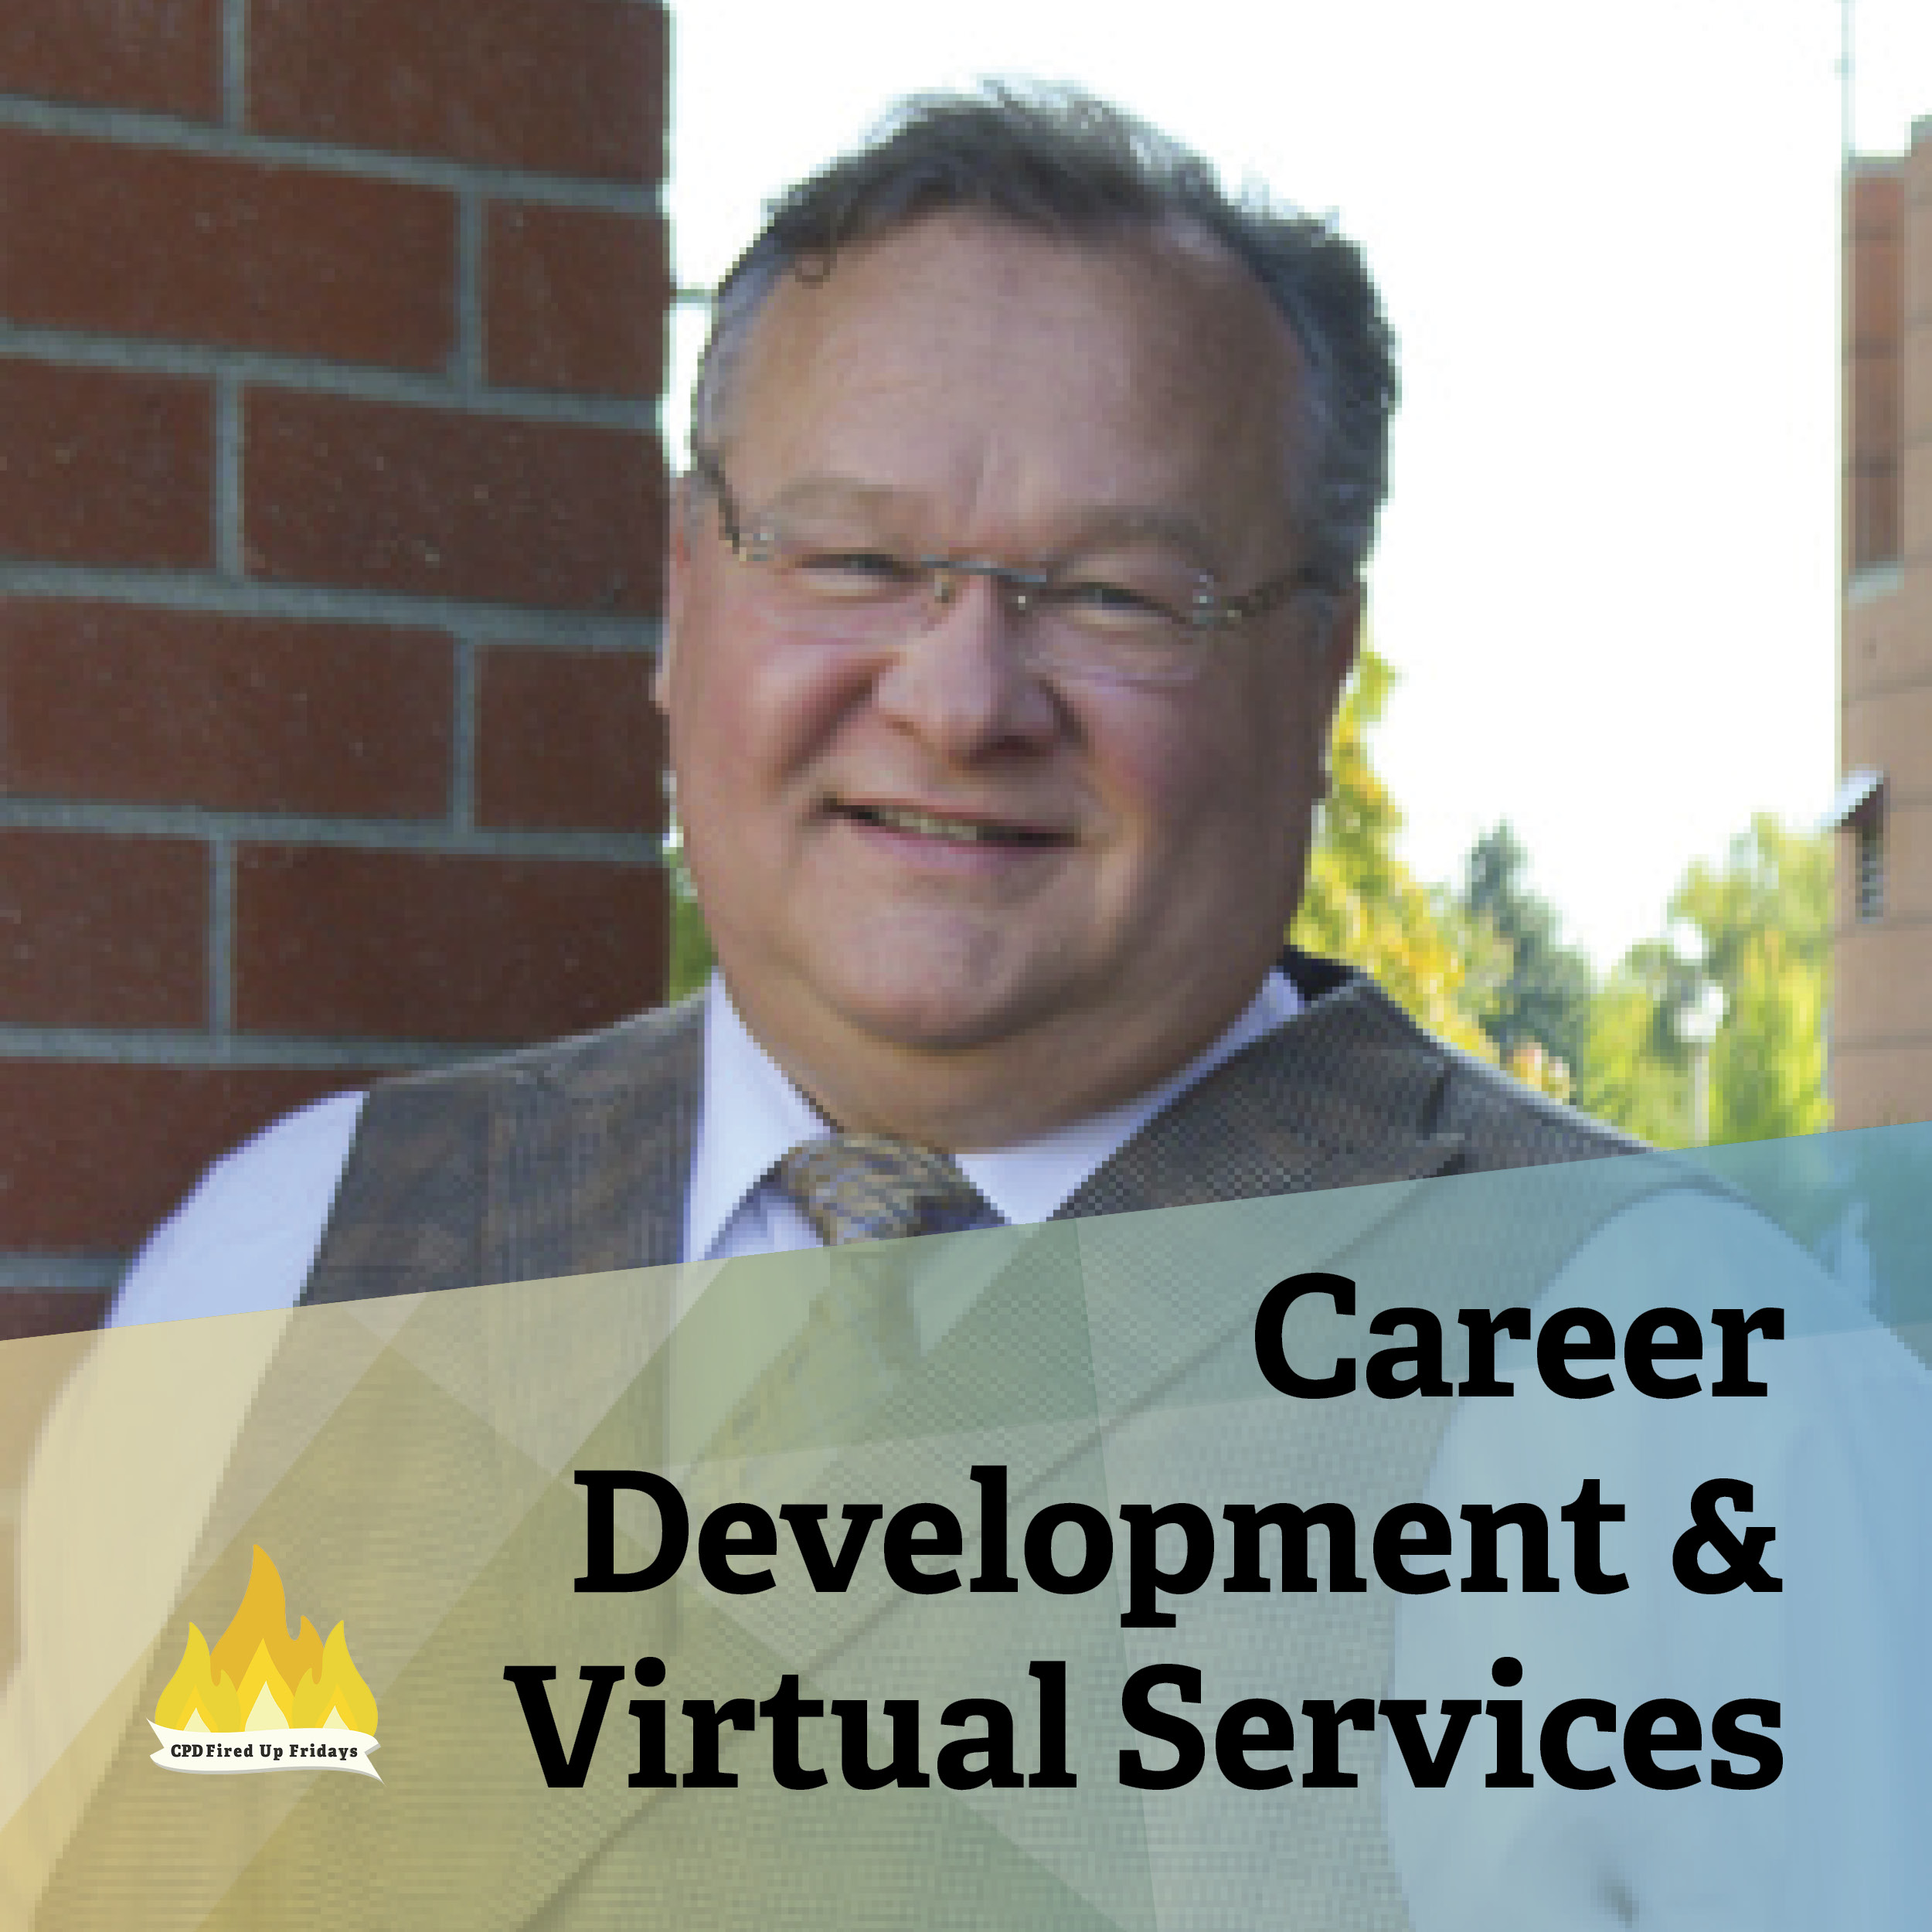 Portrait photo of Ray Angle. Underneath is text which reads: 'Career Development & Virtual Services'